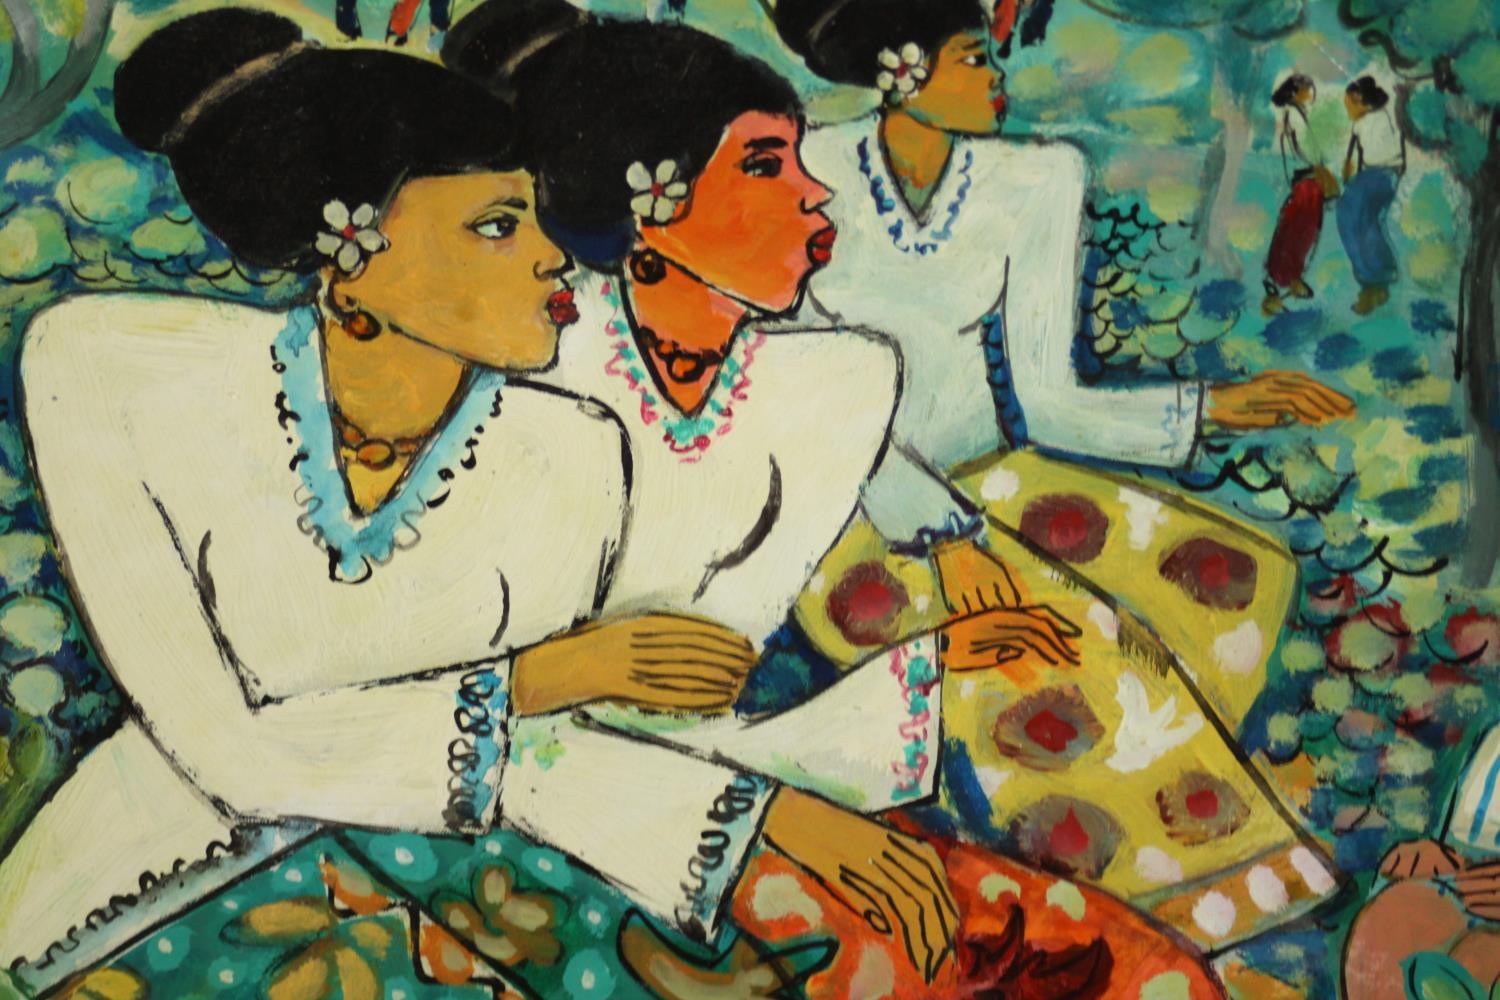 Bramasto (1929 - 1997), oil on canvas of three Indonesian women among foliage, with some figures